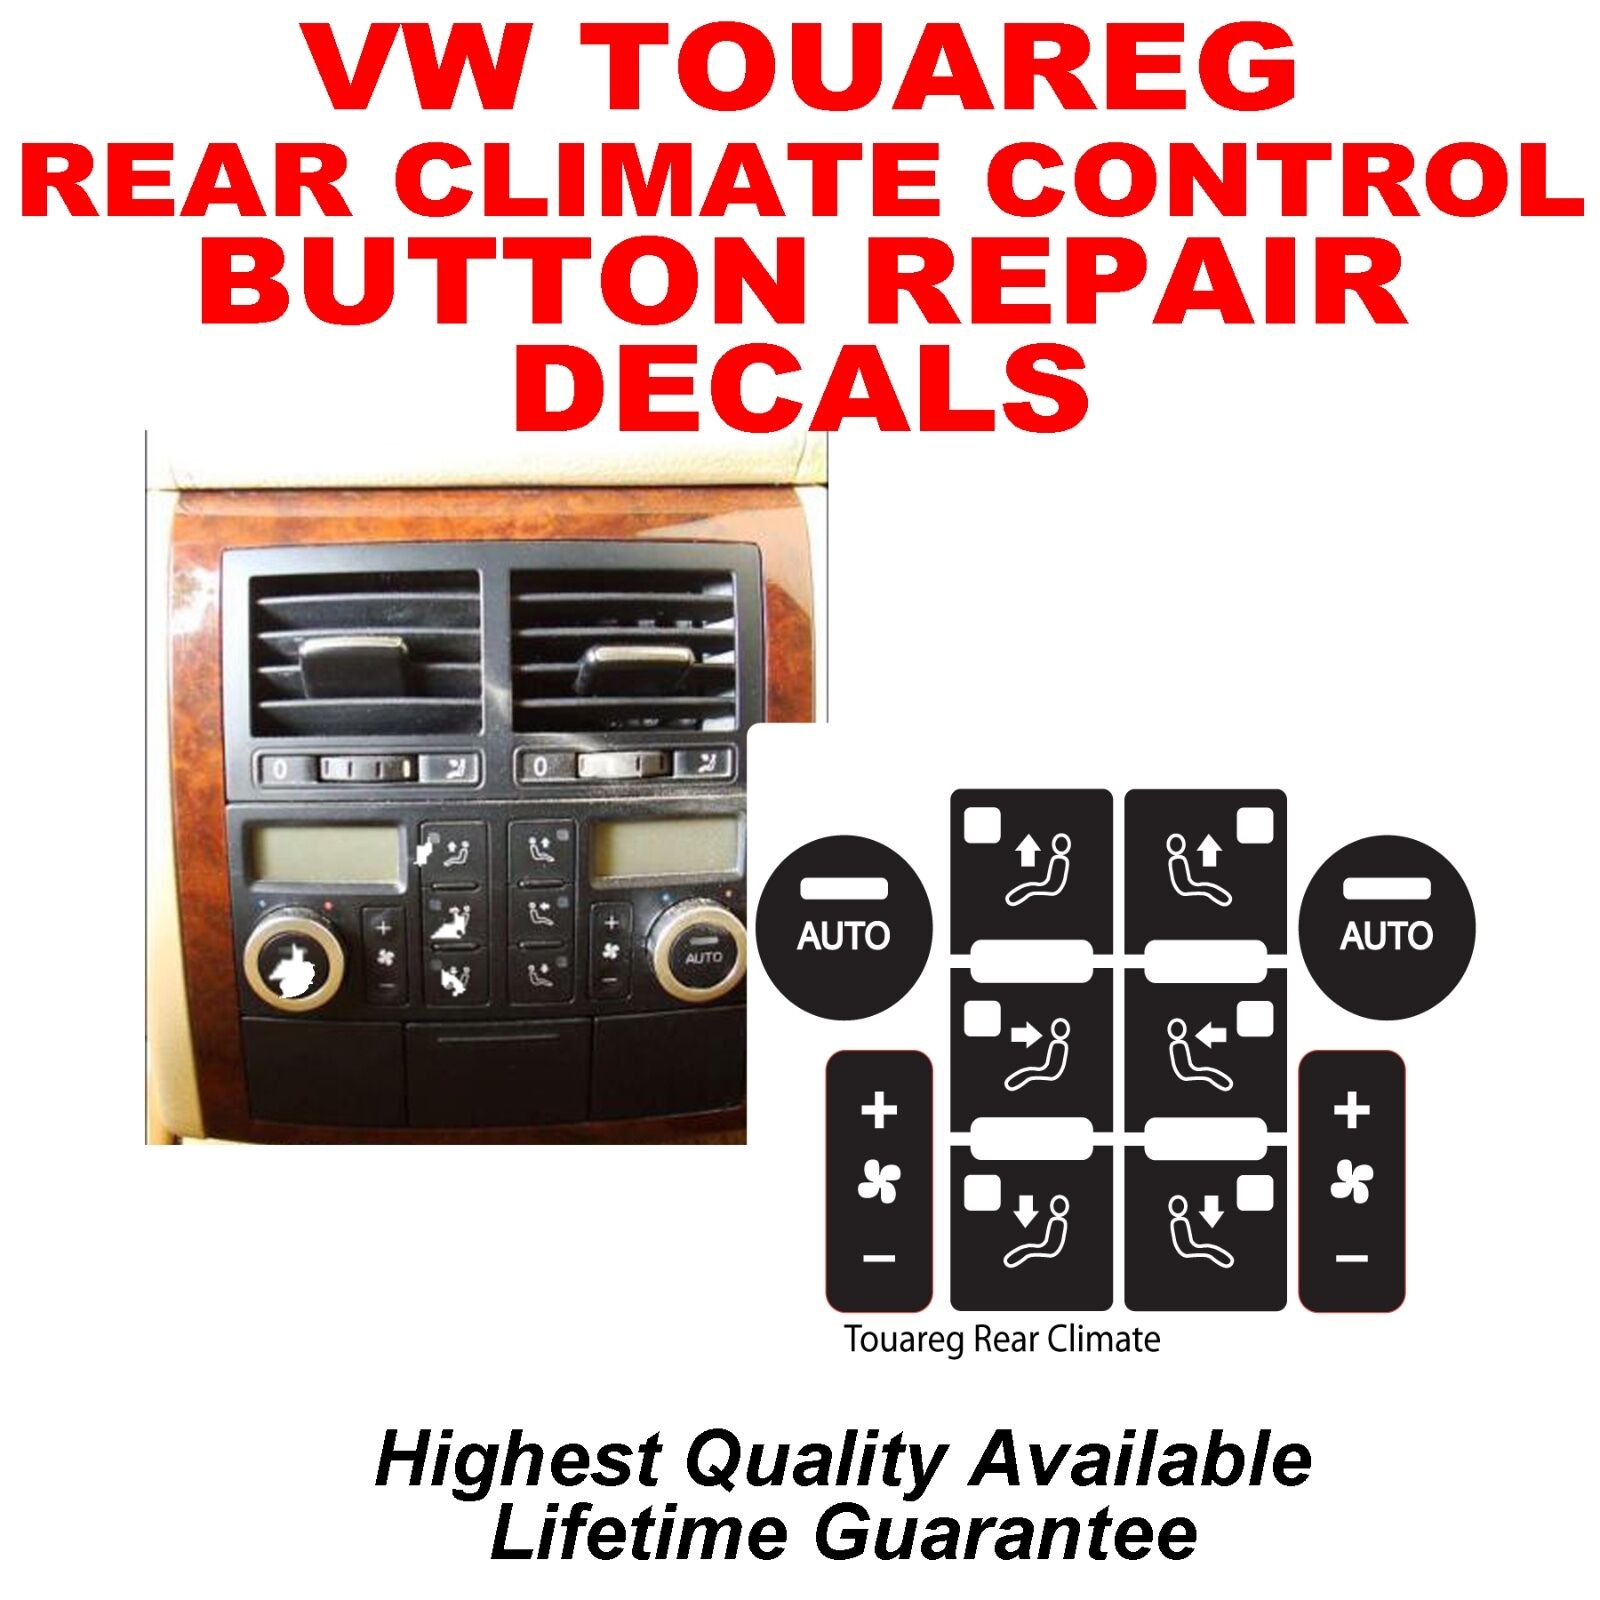 Fits VW TOUAREG REAR CLIMATE CONTROL BUTTON DECAL STICKER REPAIR